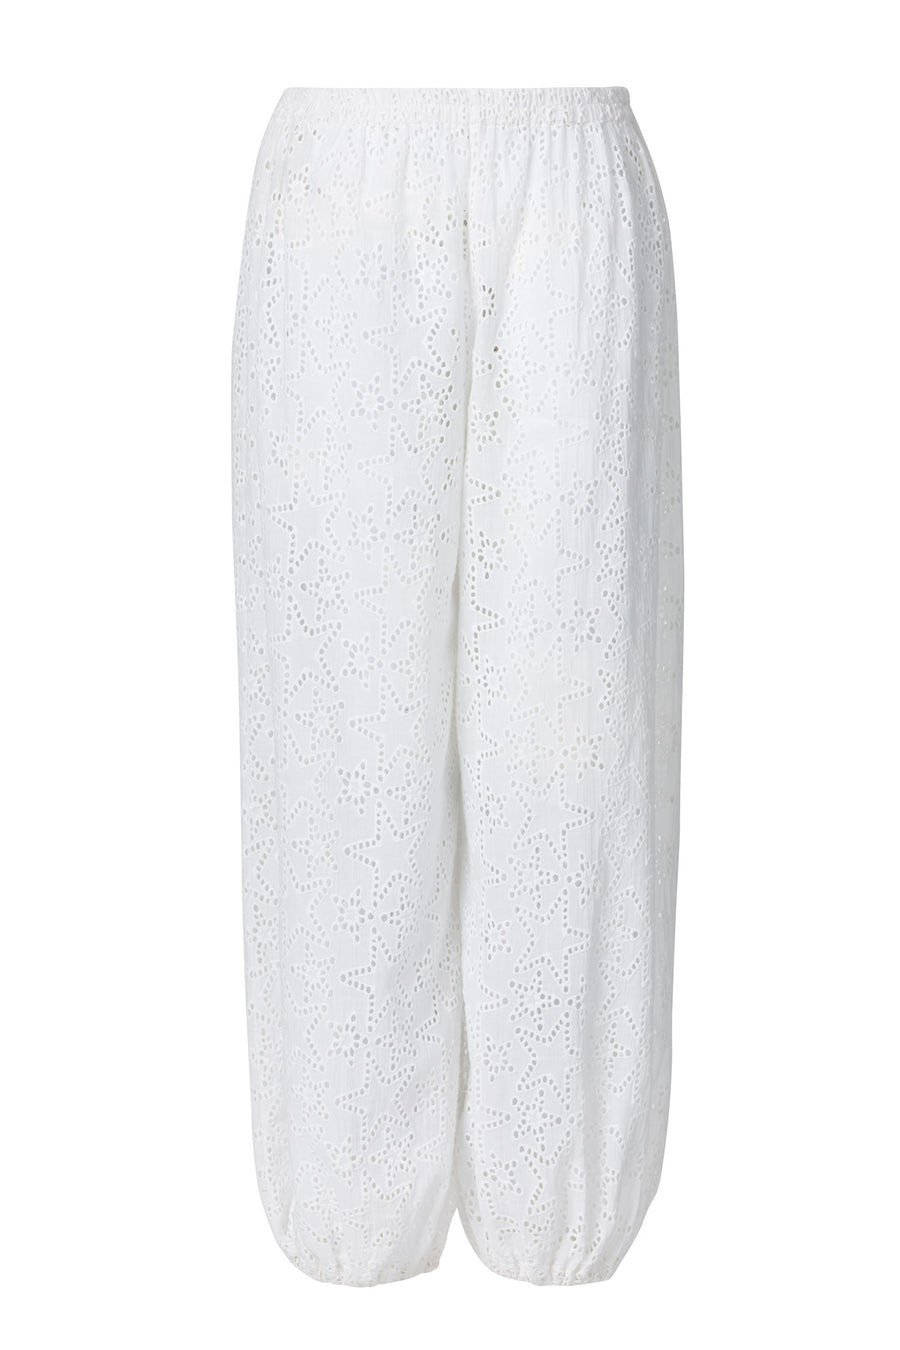 Laure Star Anglaise Pant